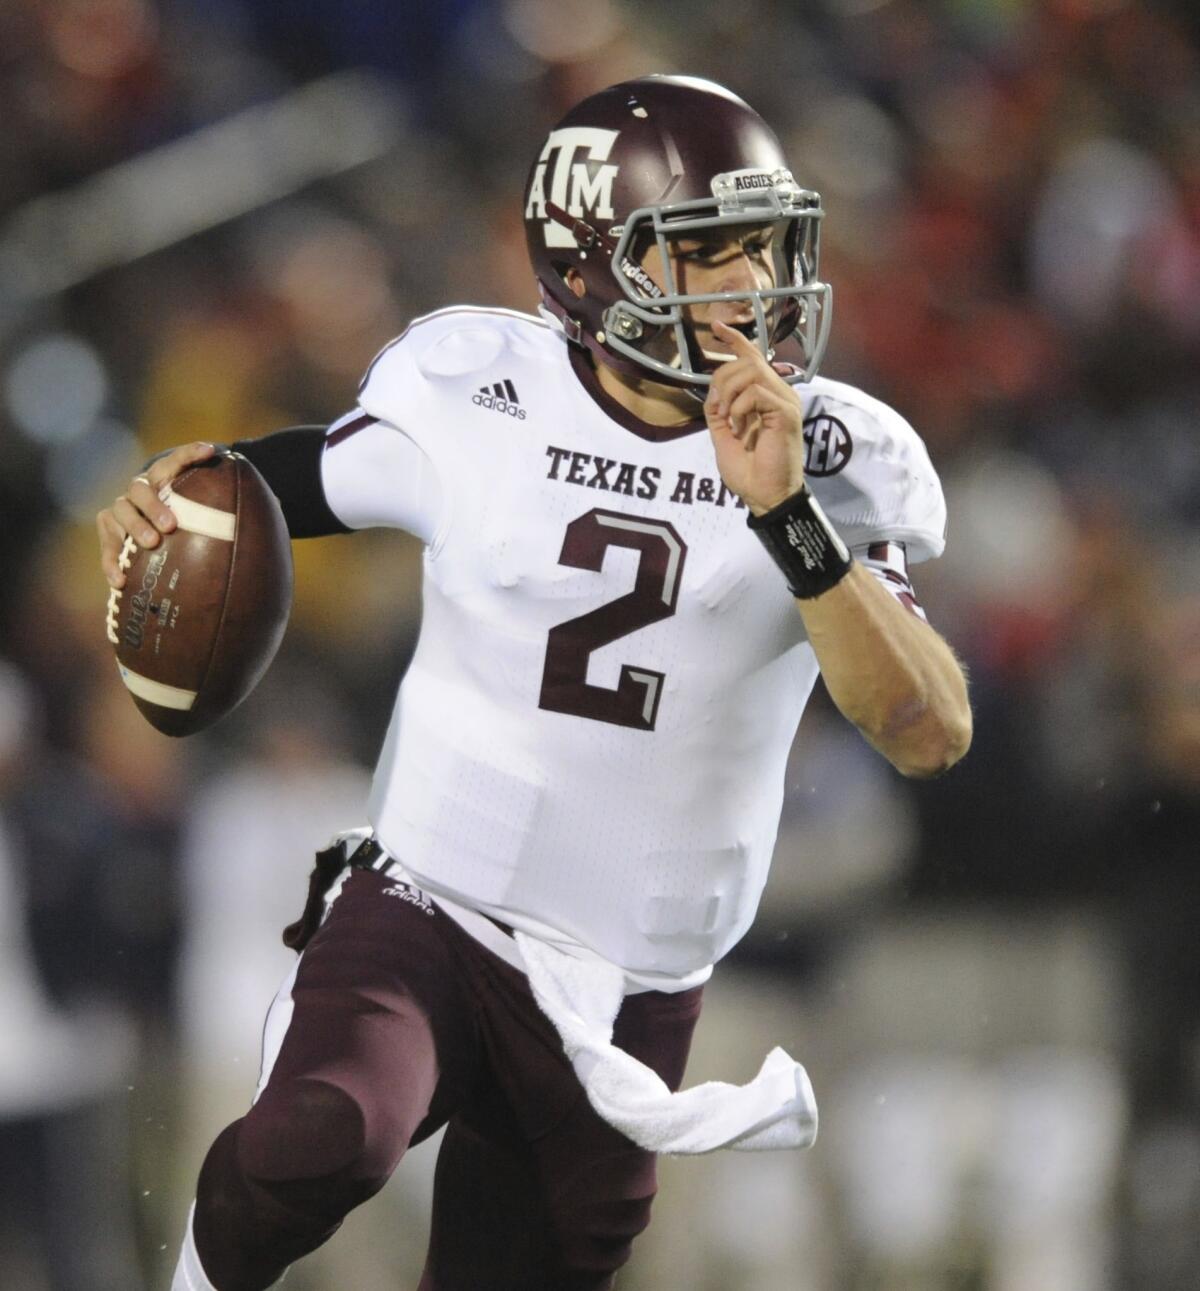 An autograph broker told ESPN that Texas A&M; quarterback Johnny Manziel was paid for signing football helmets.